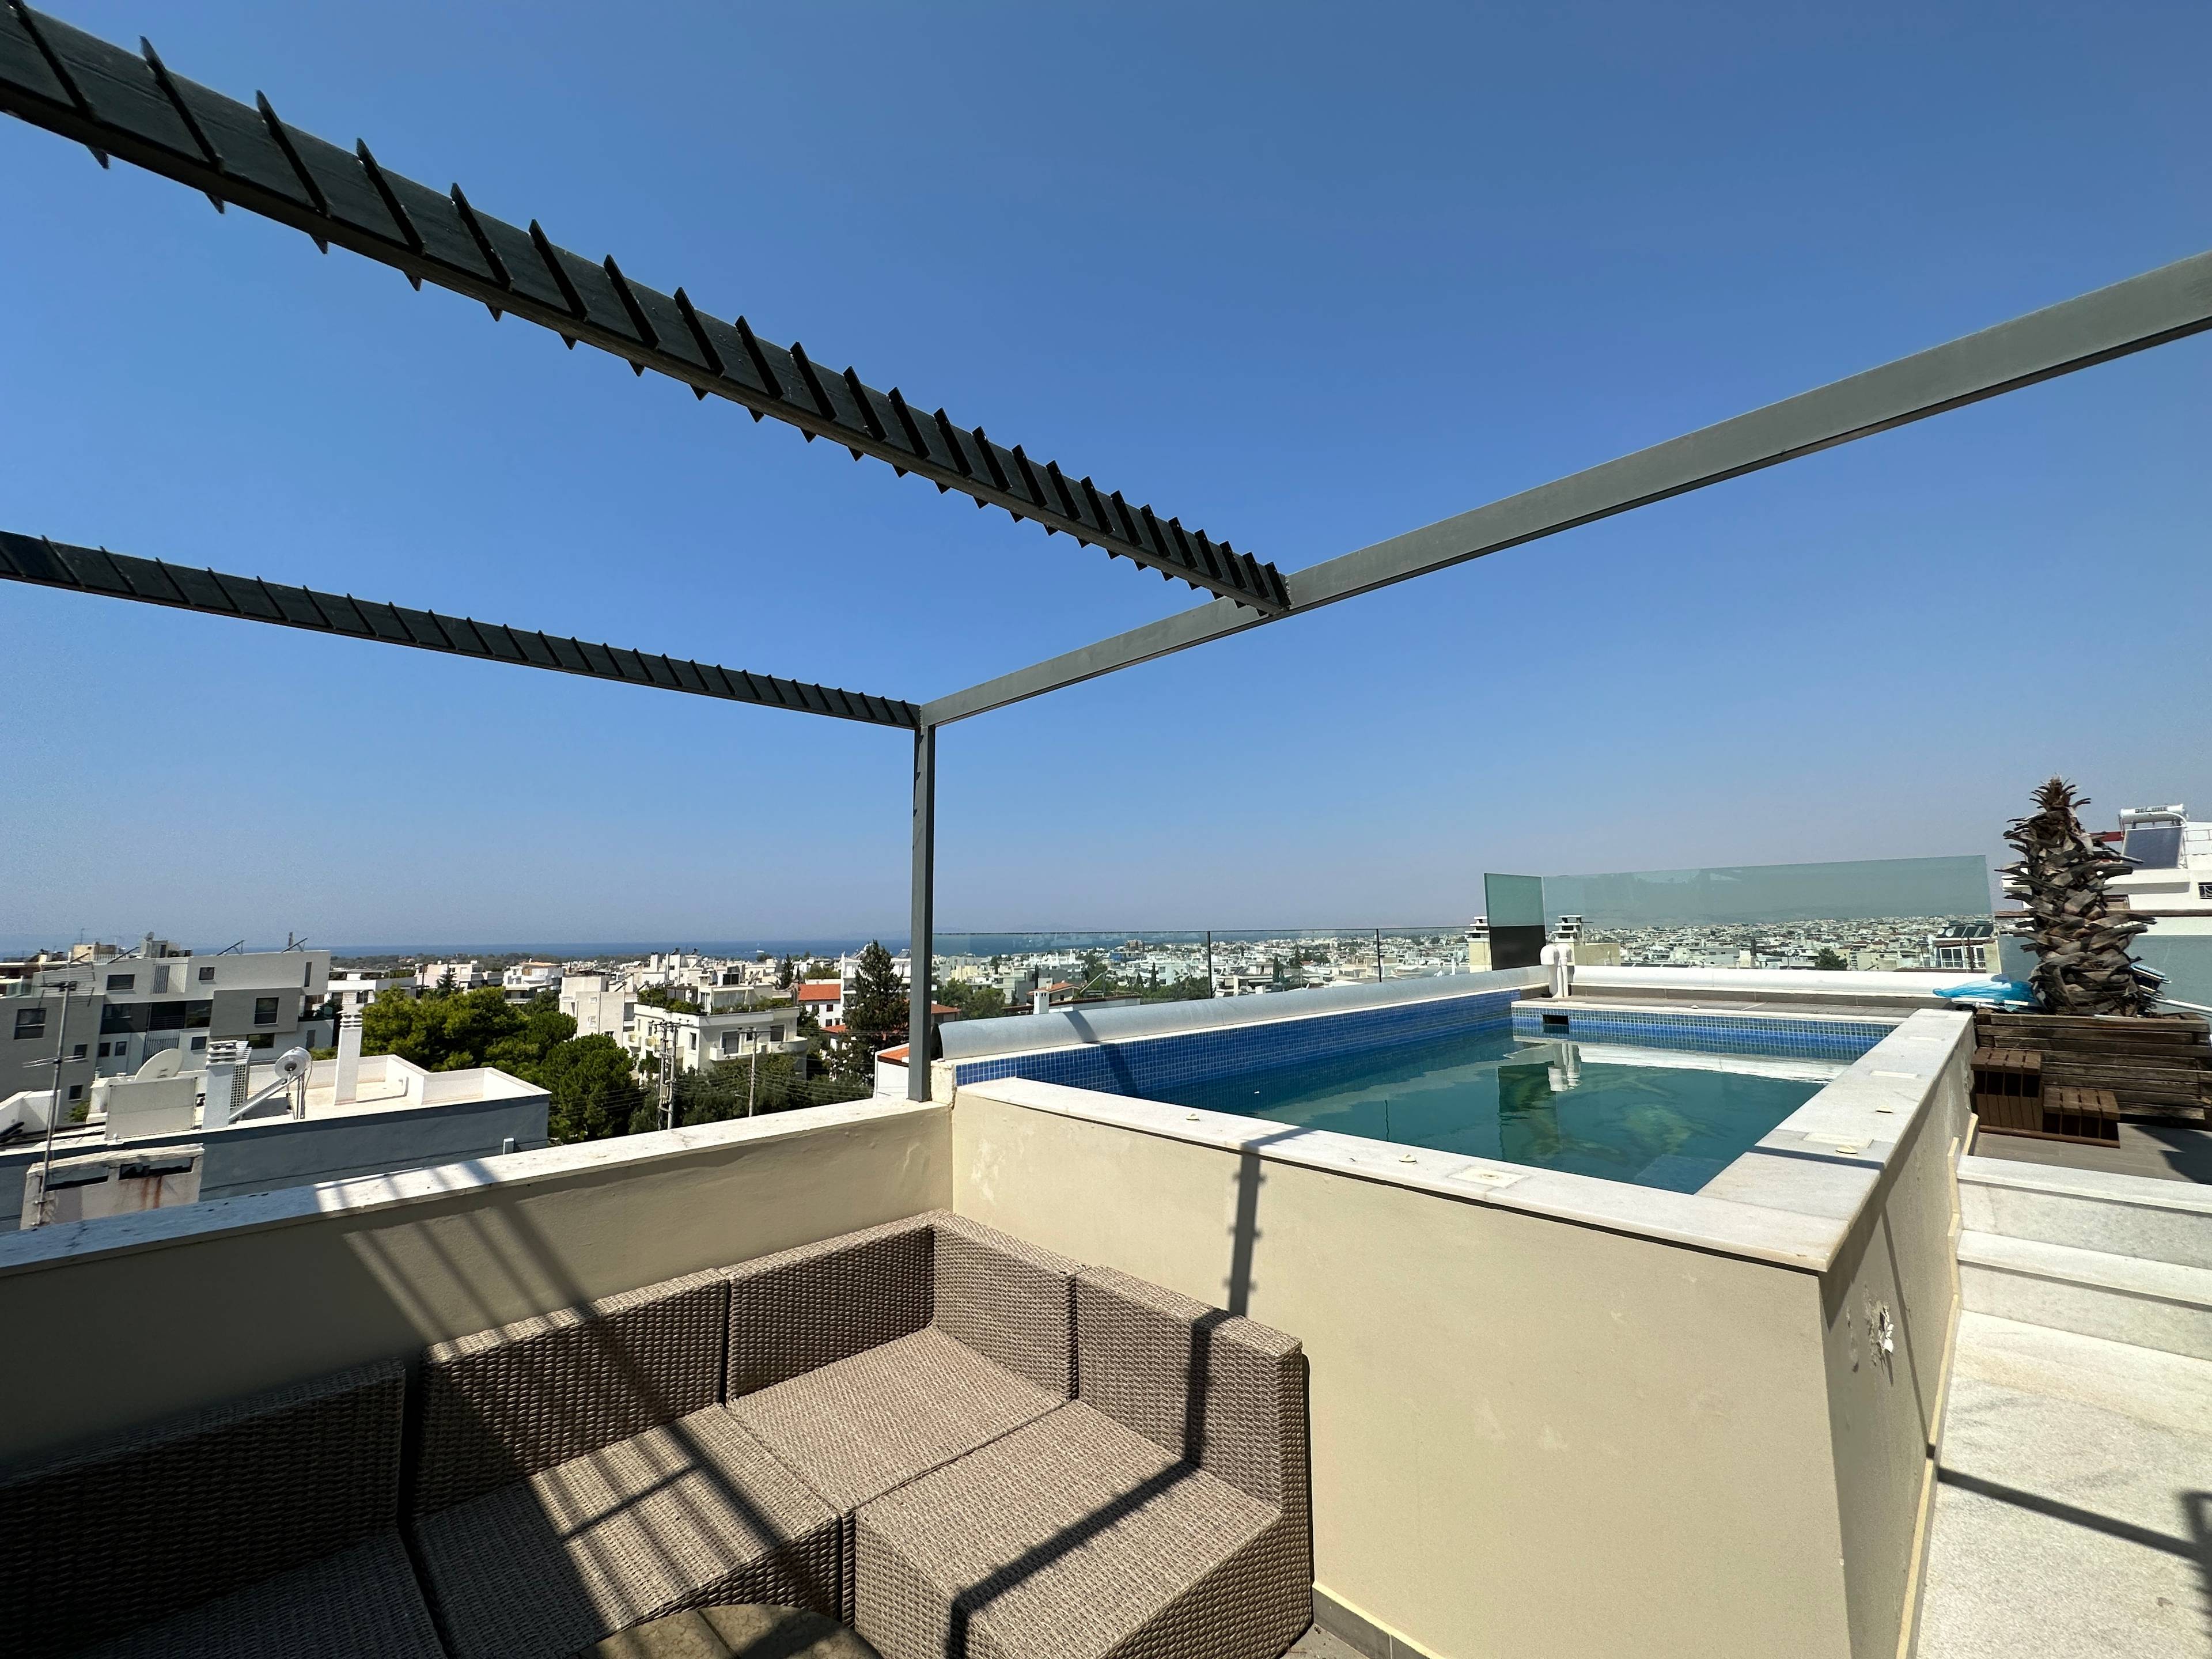 Penthouse Maisonette, 212 sqm, 3rd-4th floor, with swimming pool, in Glyfada.